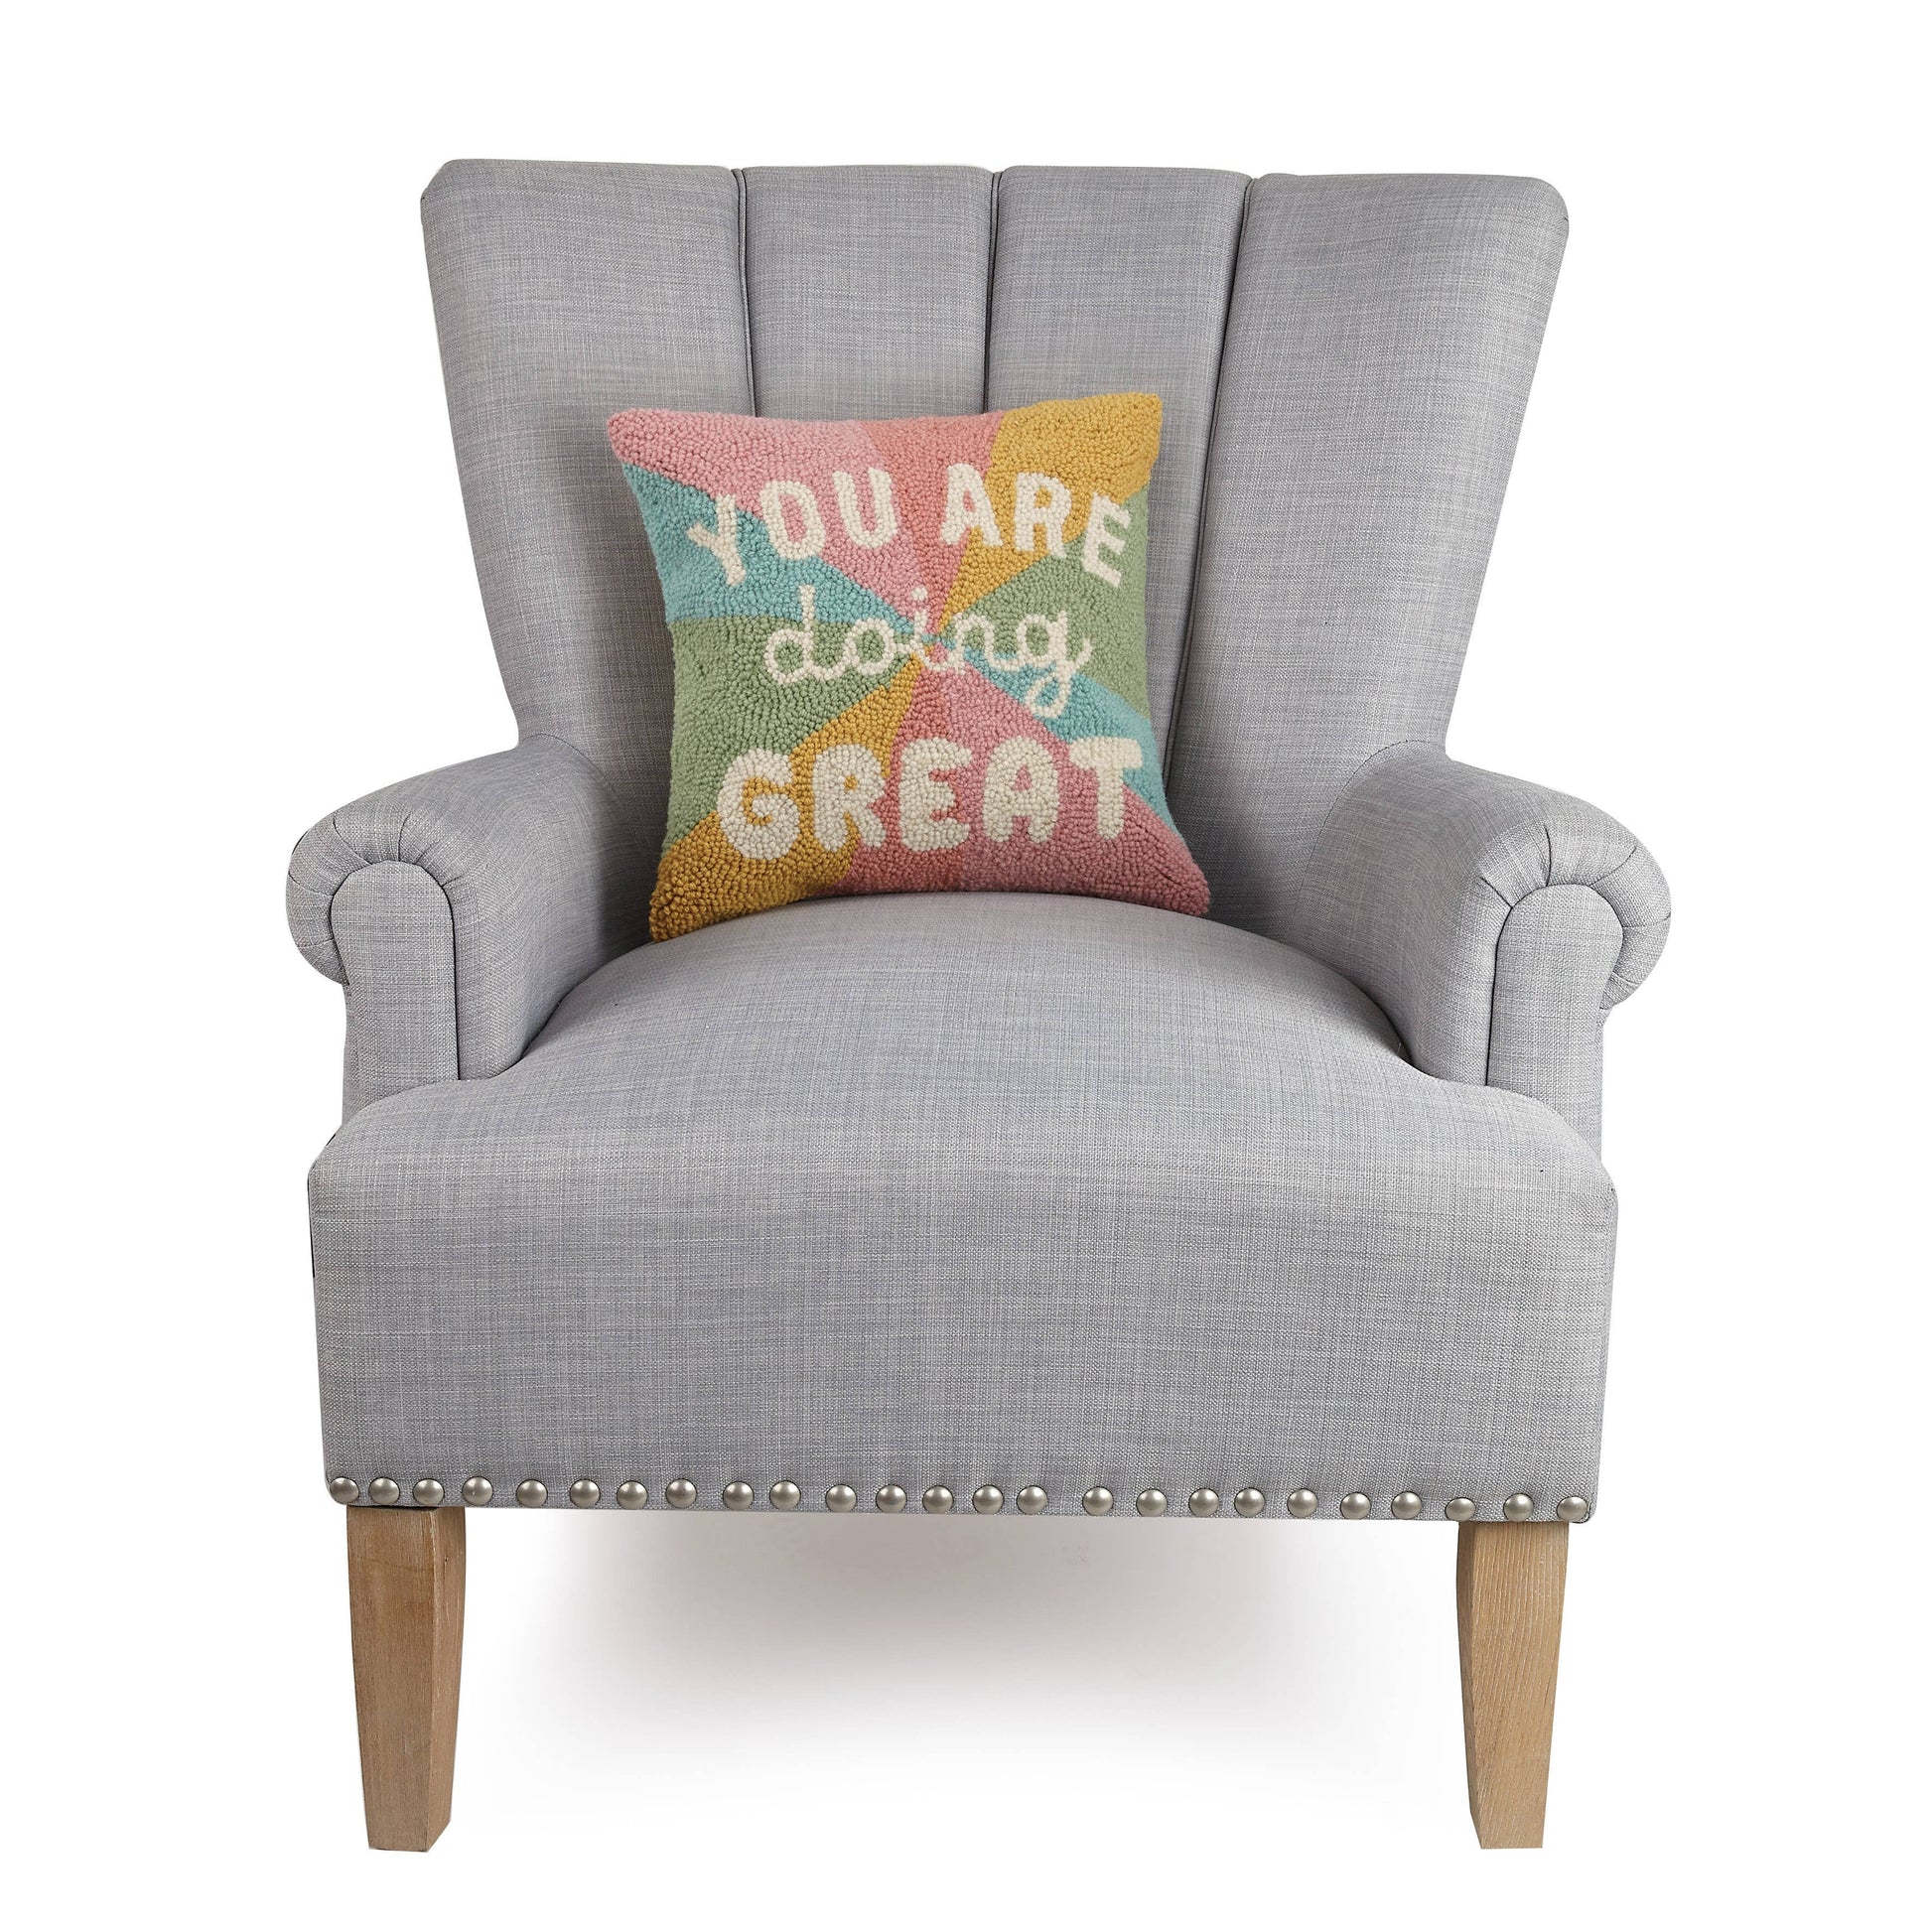 You Are Doing Great Decorative Hook Pillow